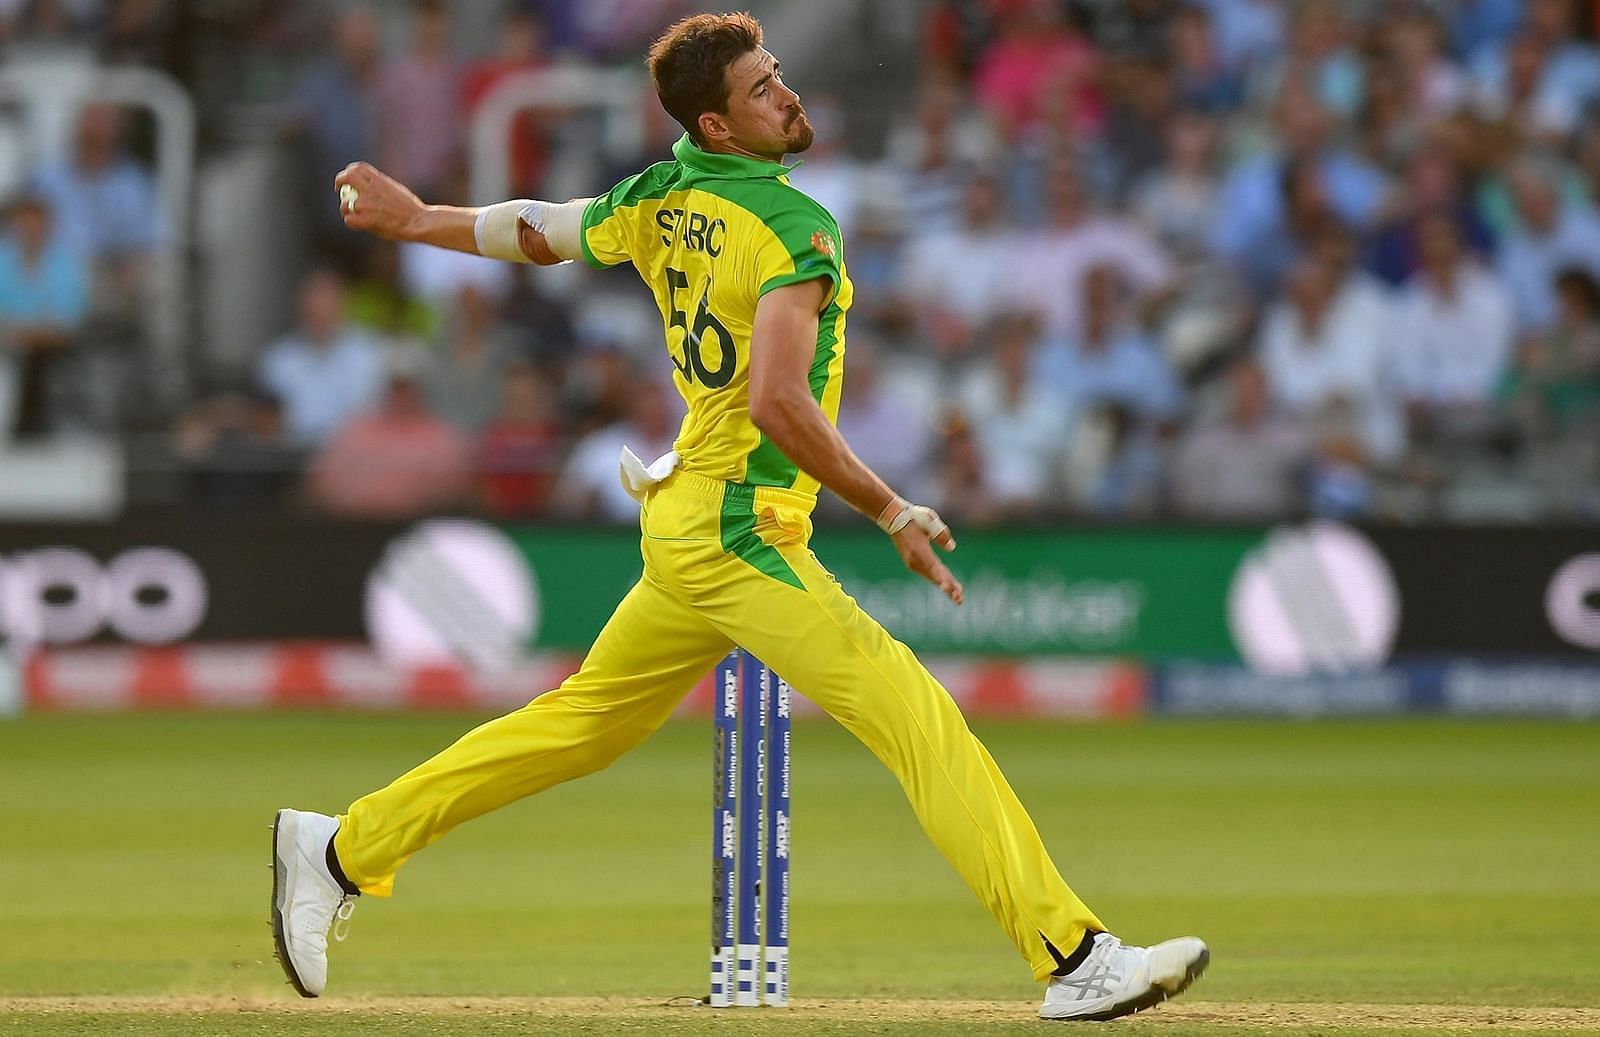 Mitchell Starc will look to be among the wickets in the T20 World Cup